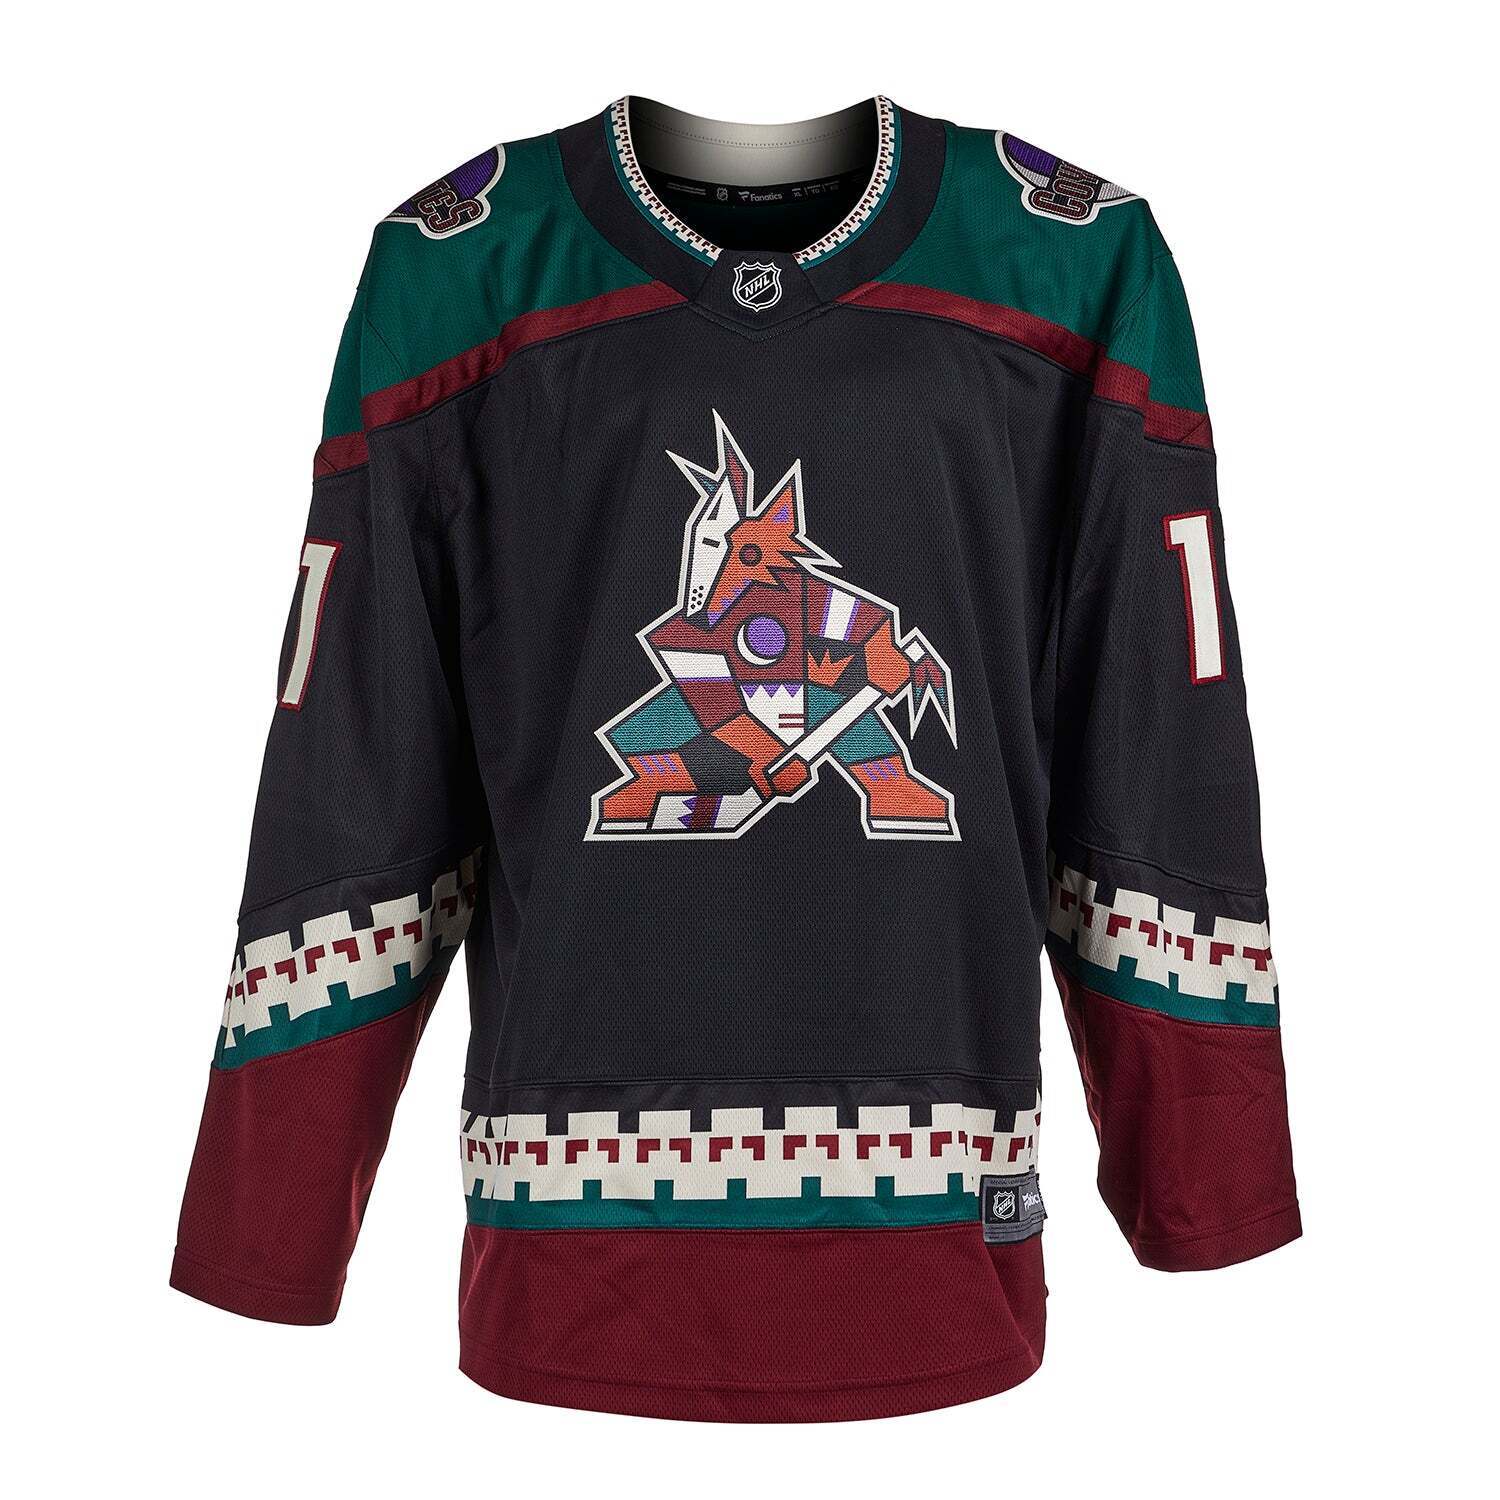 Max Domi Signed #16 Reebok Premier Arizona Coyotes Jersey Jsa Coa Licensed  - Autographed NHL Jerseys at 's Sports Collectibles Store